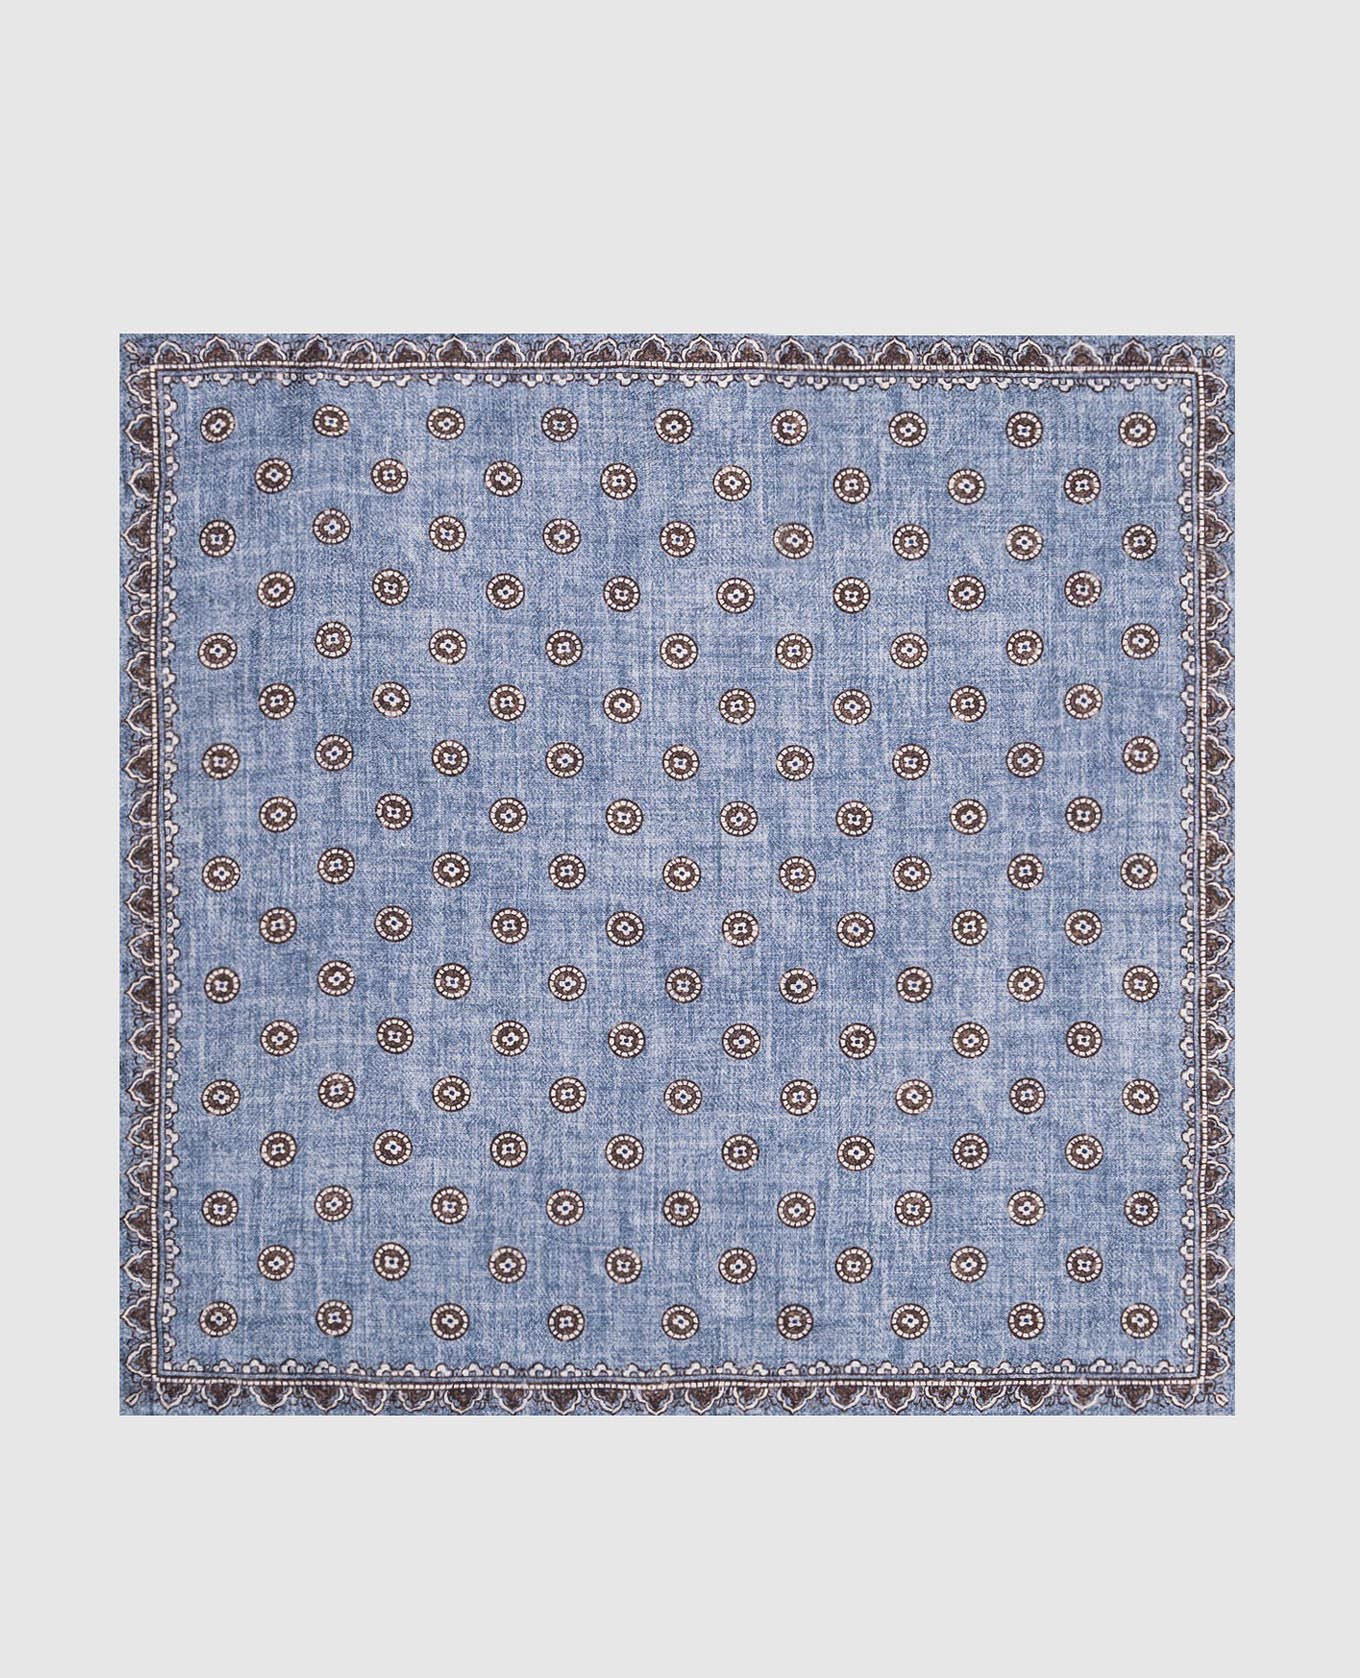 Blue double-sided pache scarf made of silk with a pattern